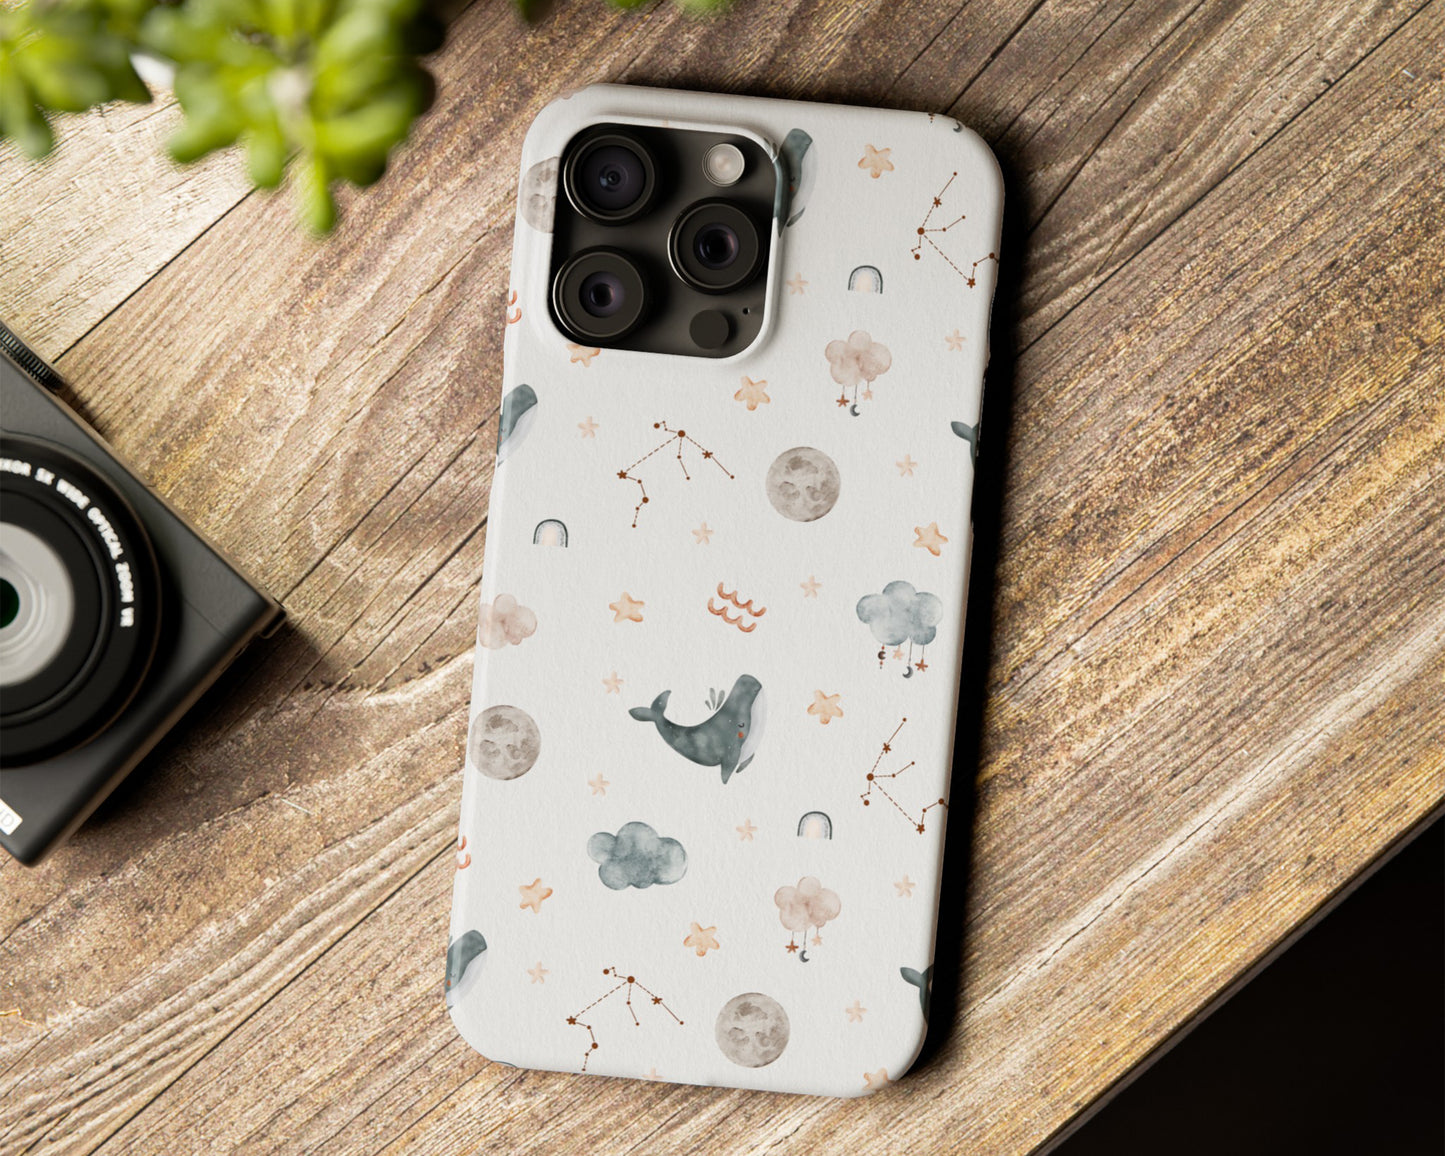 Zodiac sign watercolor baby patterns iPhone case